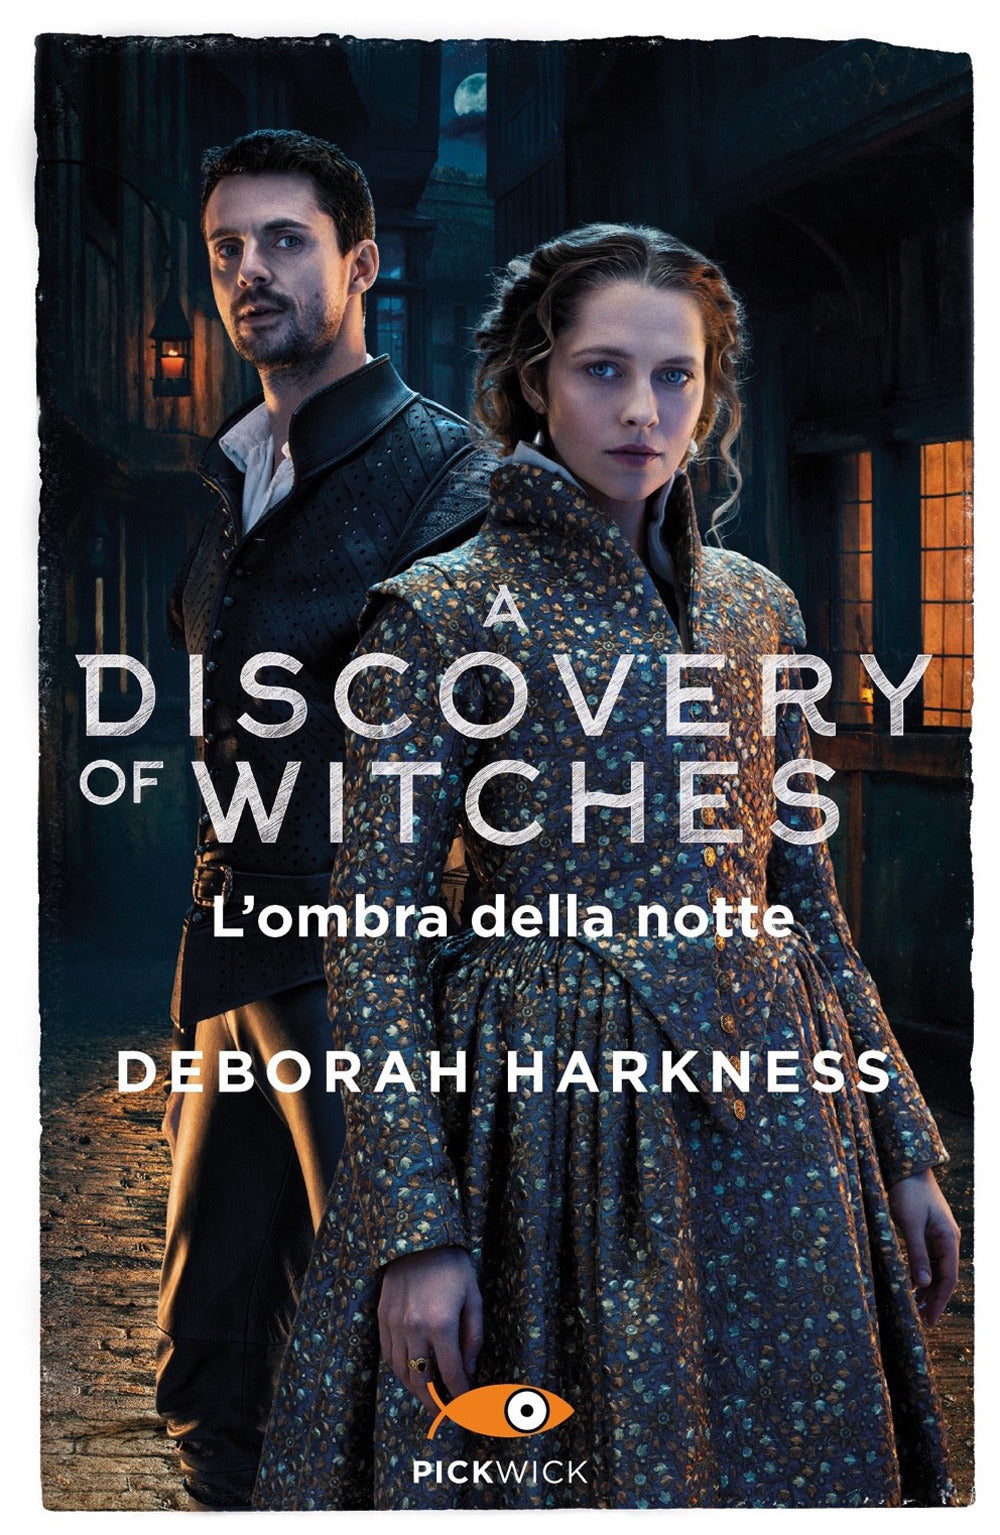 L'ombra della notte. A discovery of witches. Vol. 2.